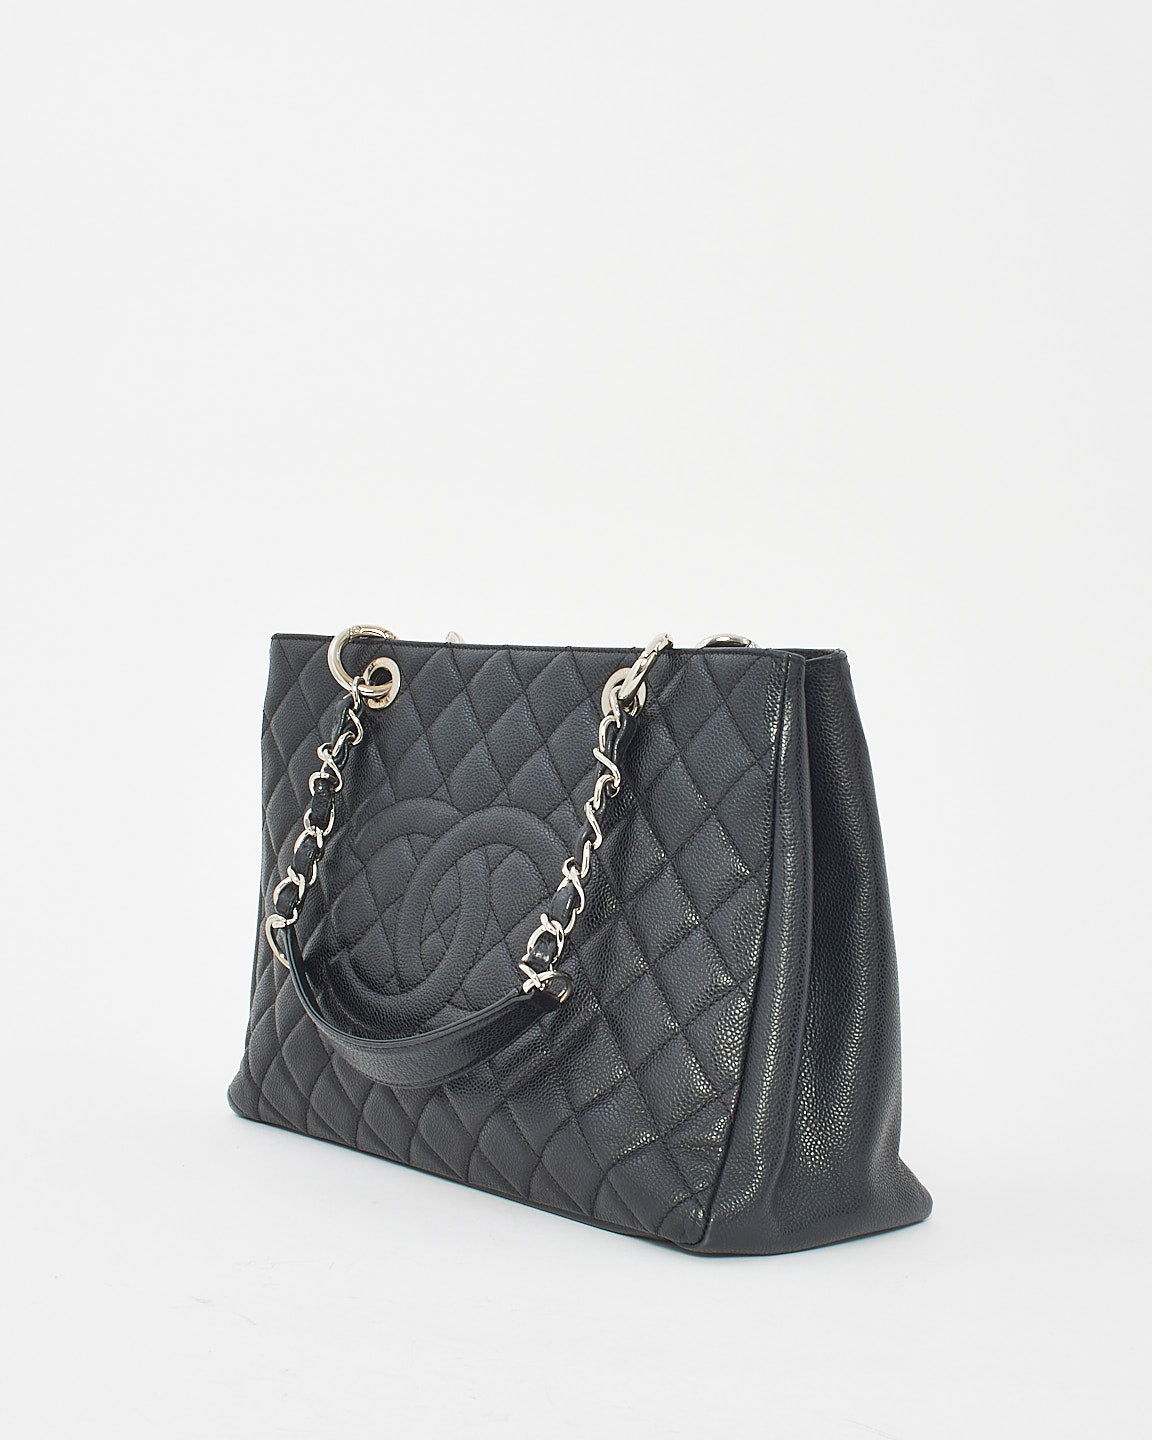 Chanel Black Caviar Quilted GST Shopping Tote Bag